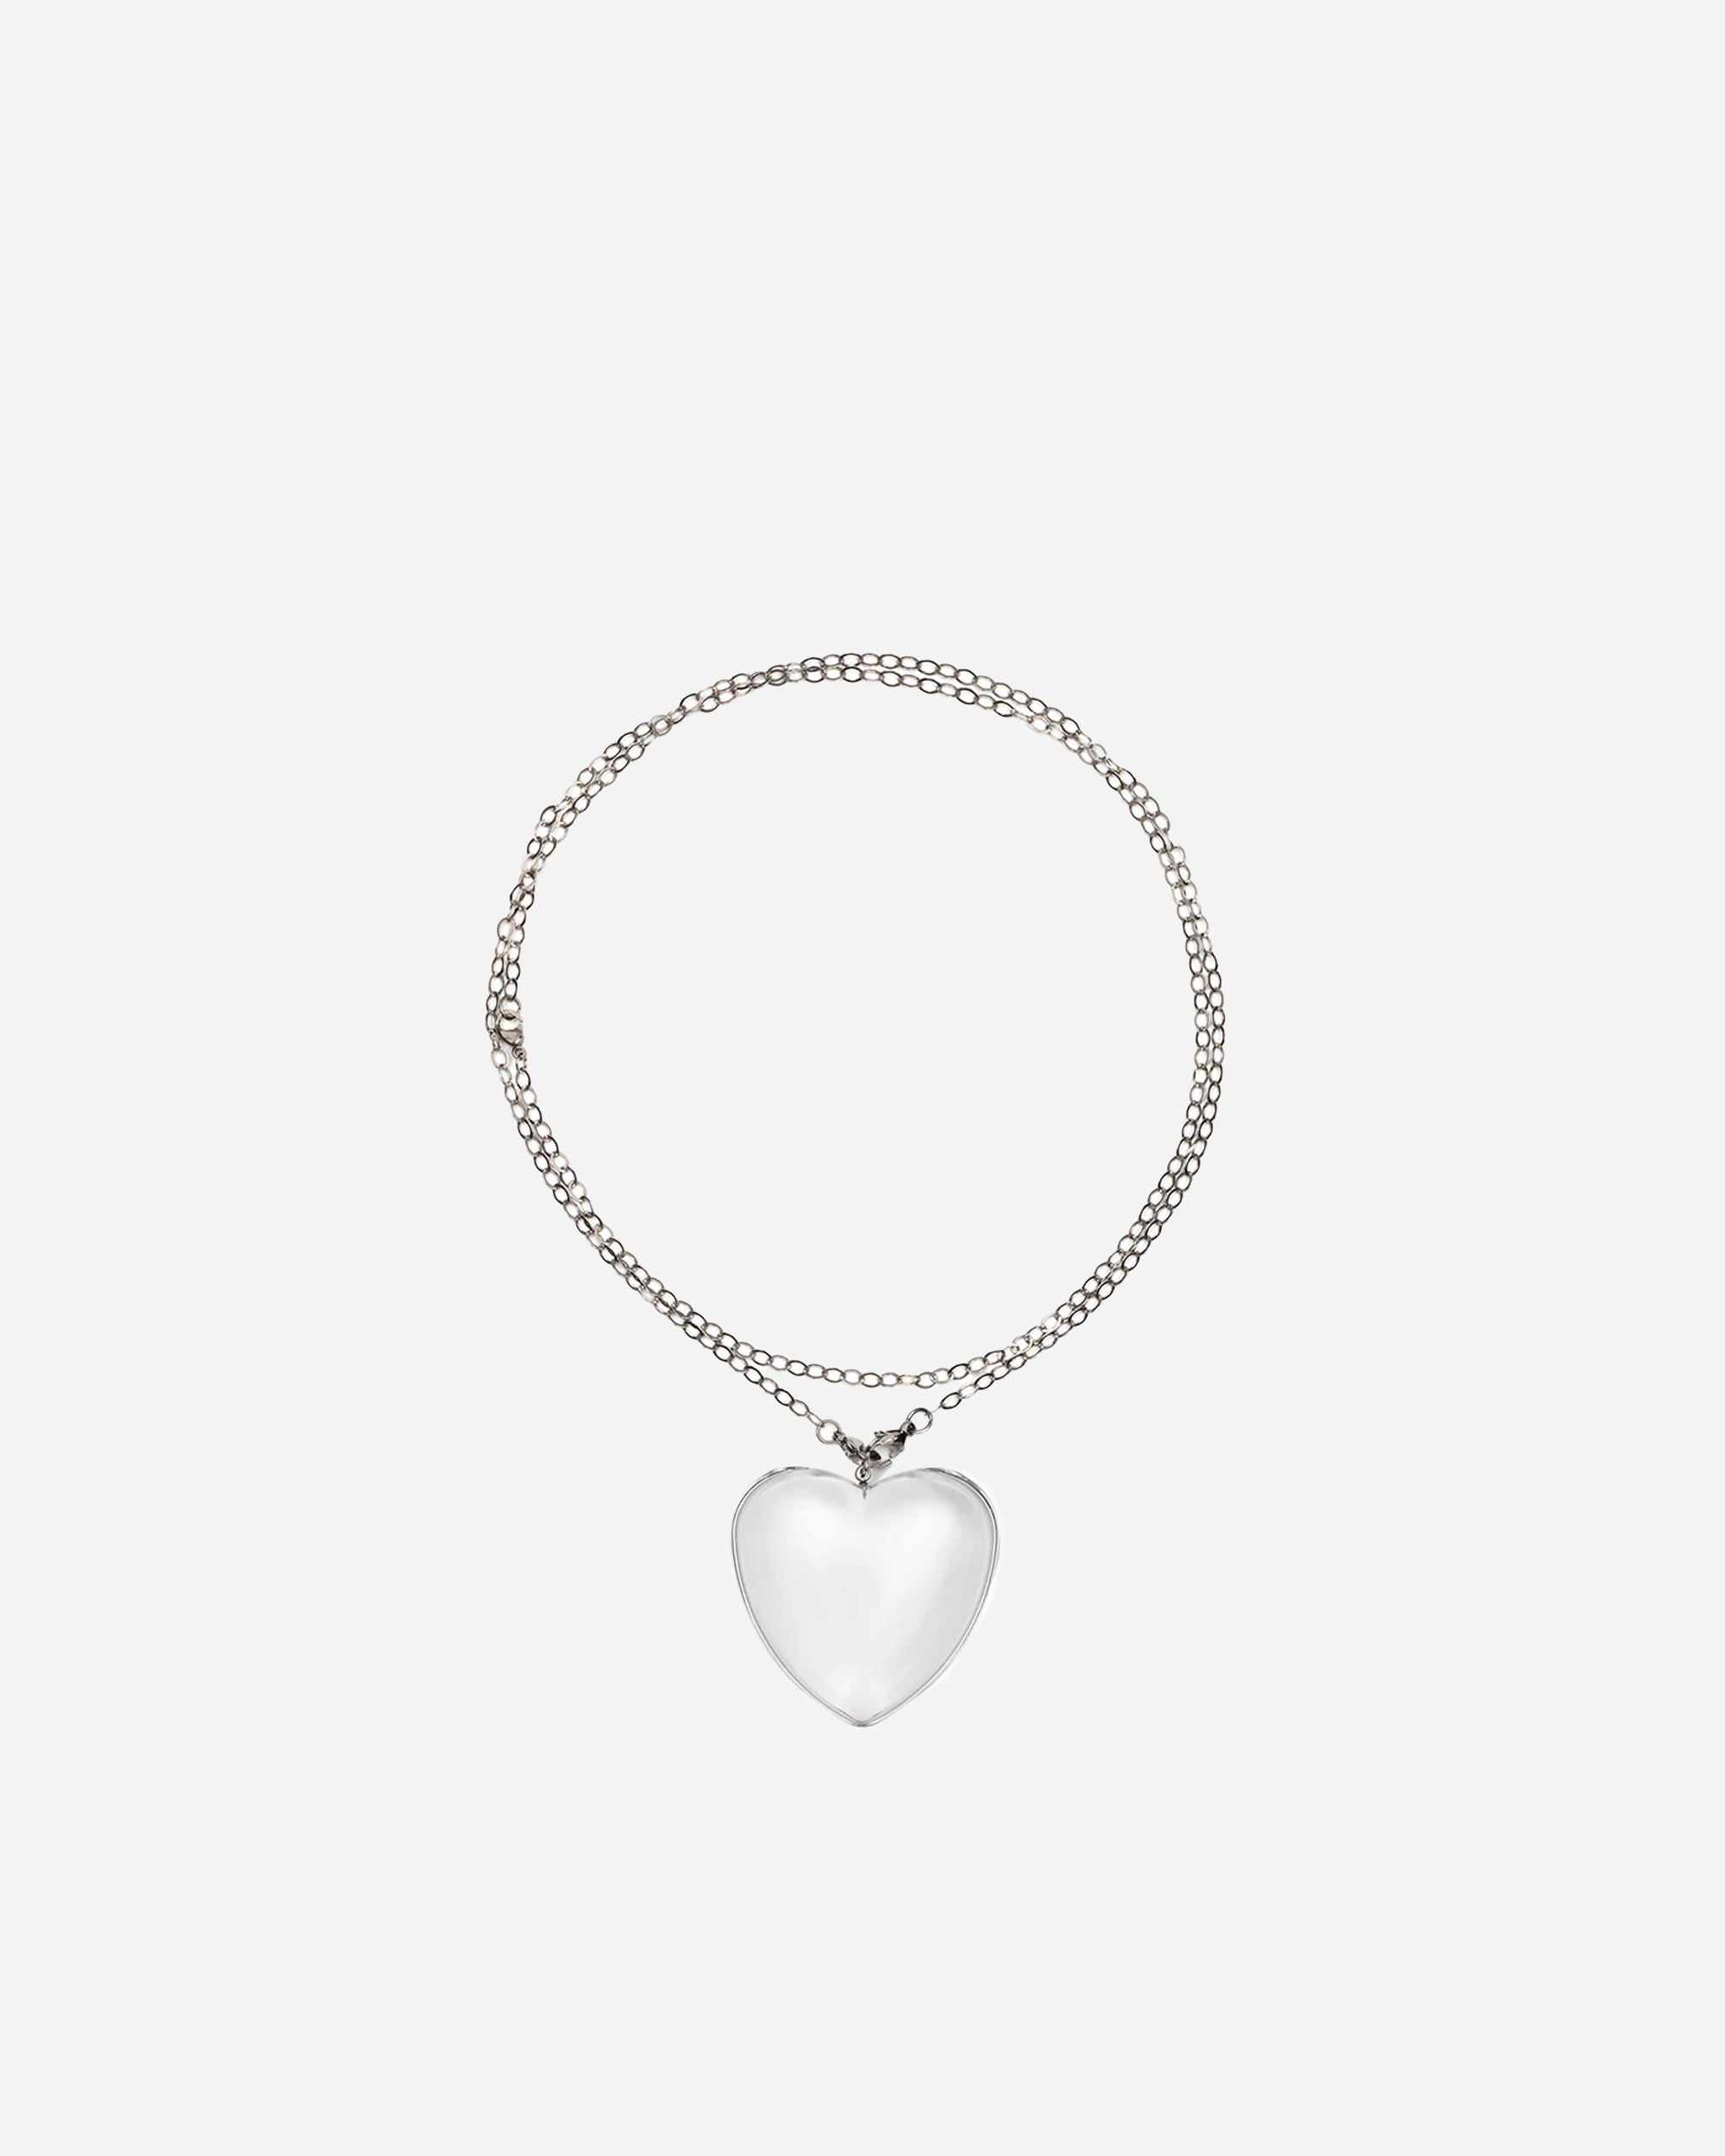 The Good Statement Small Heart Necklace Clear TGS-A-25